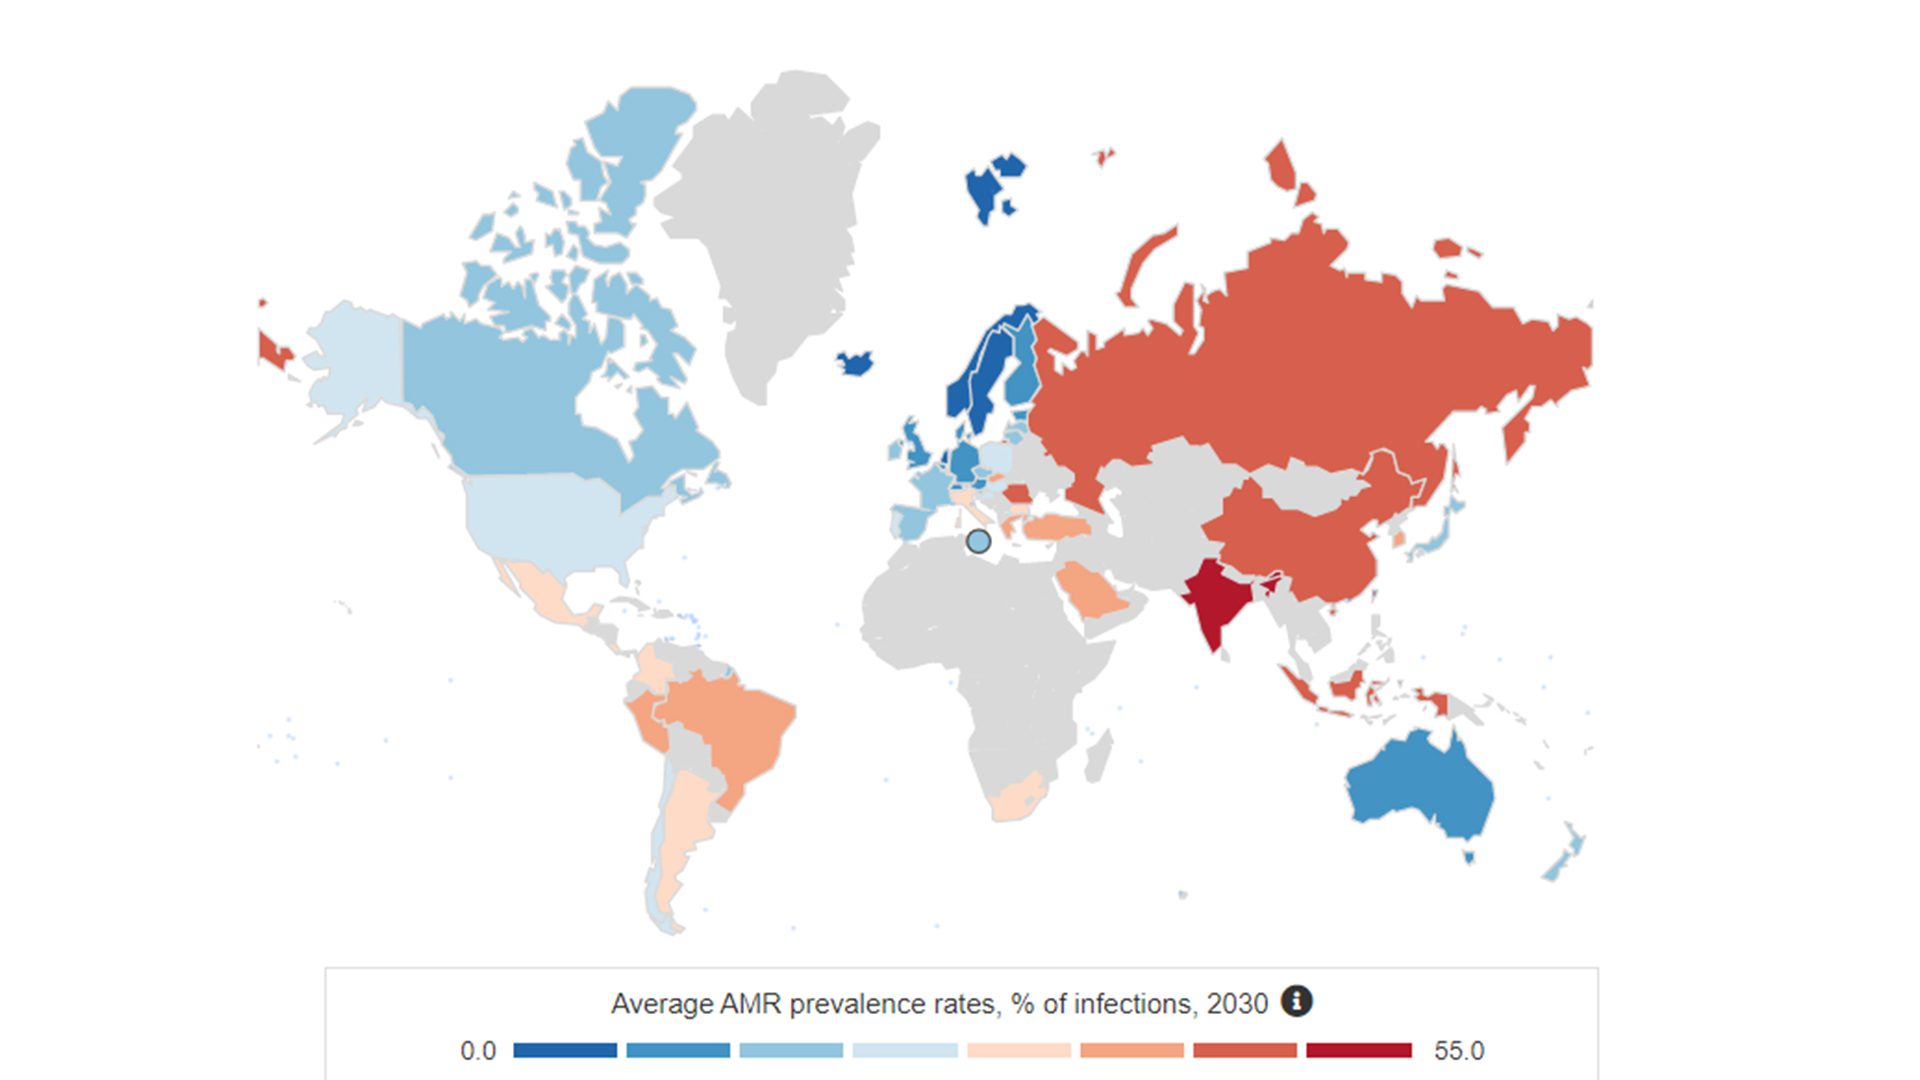 The OECD projected the world average prevalence rates of antimicrobial resistance by 2030 [2]